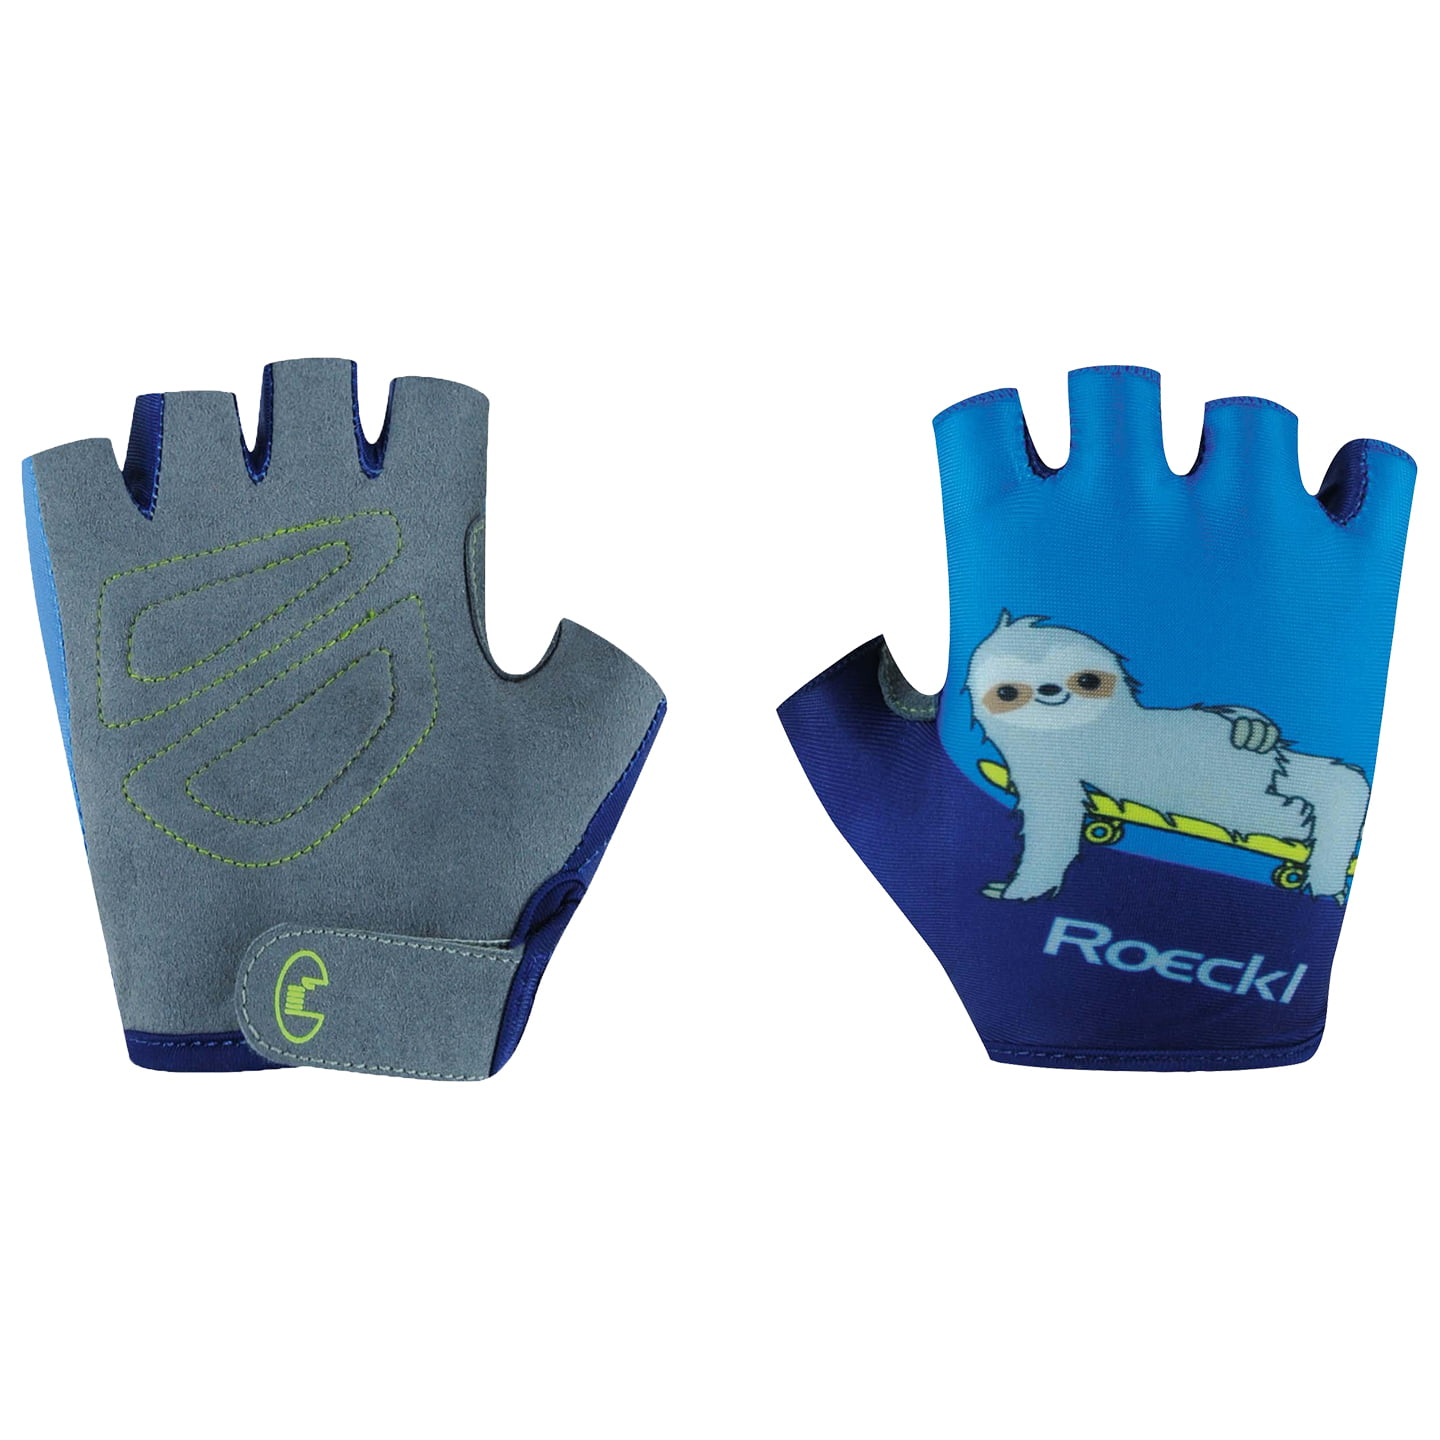 ROECKL Trient Kids Gloves Kids Cycling Gloves, size 6, Kids cycle gloves, Kids cycling gear